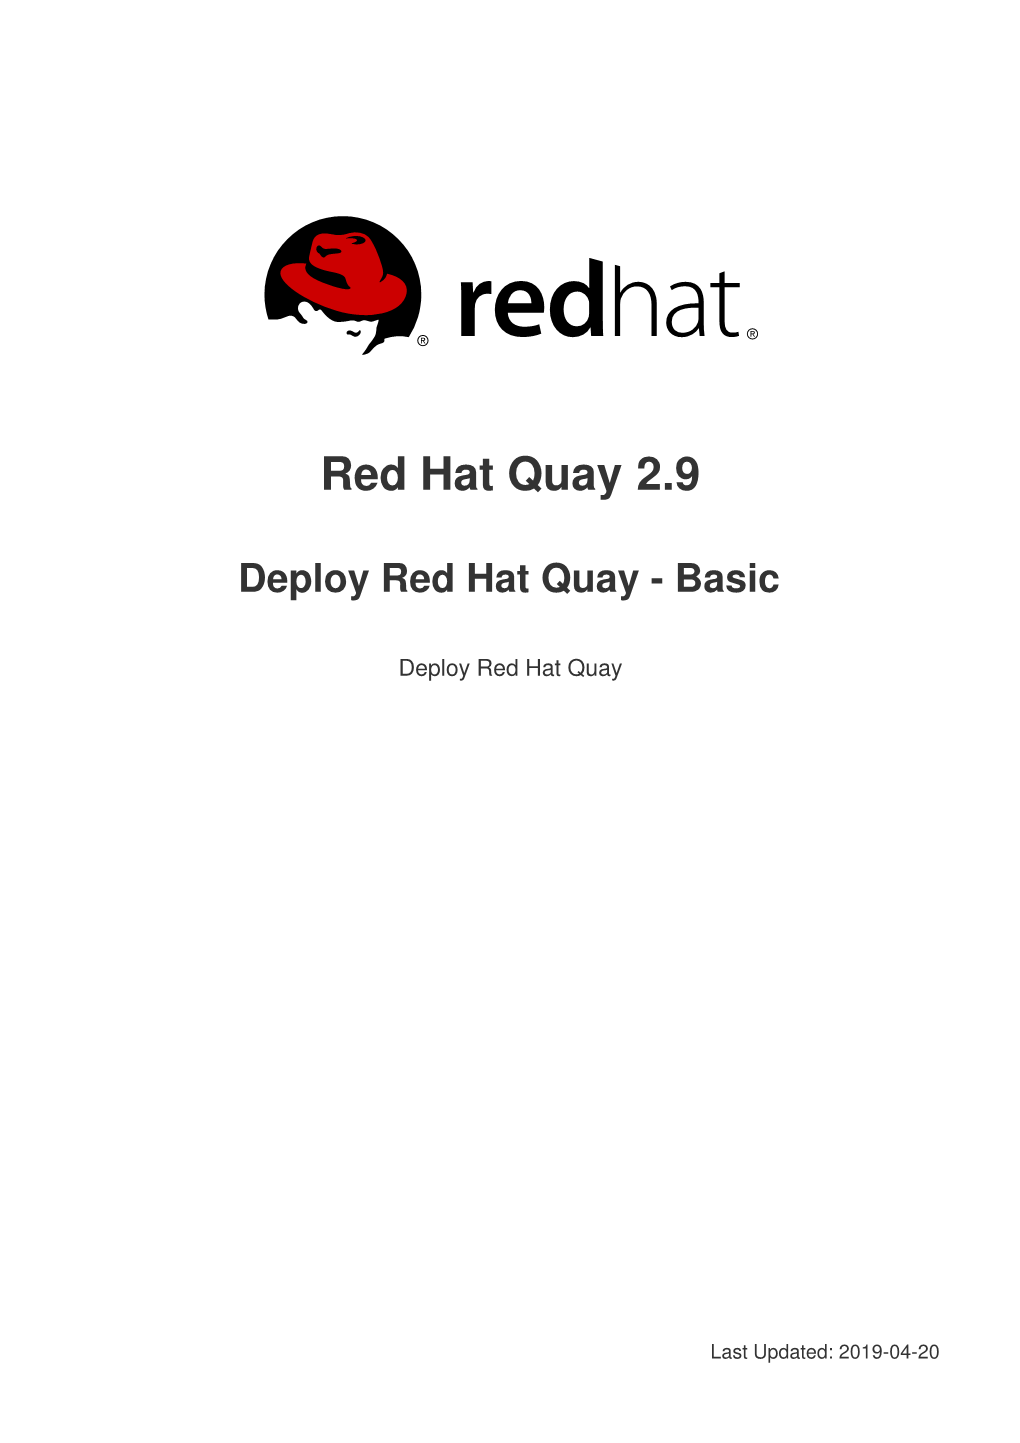 Red Hat Quay 2.9 Deploy Red Hat Quay - Basic